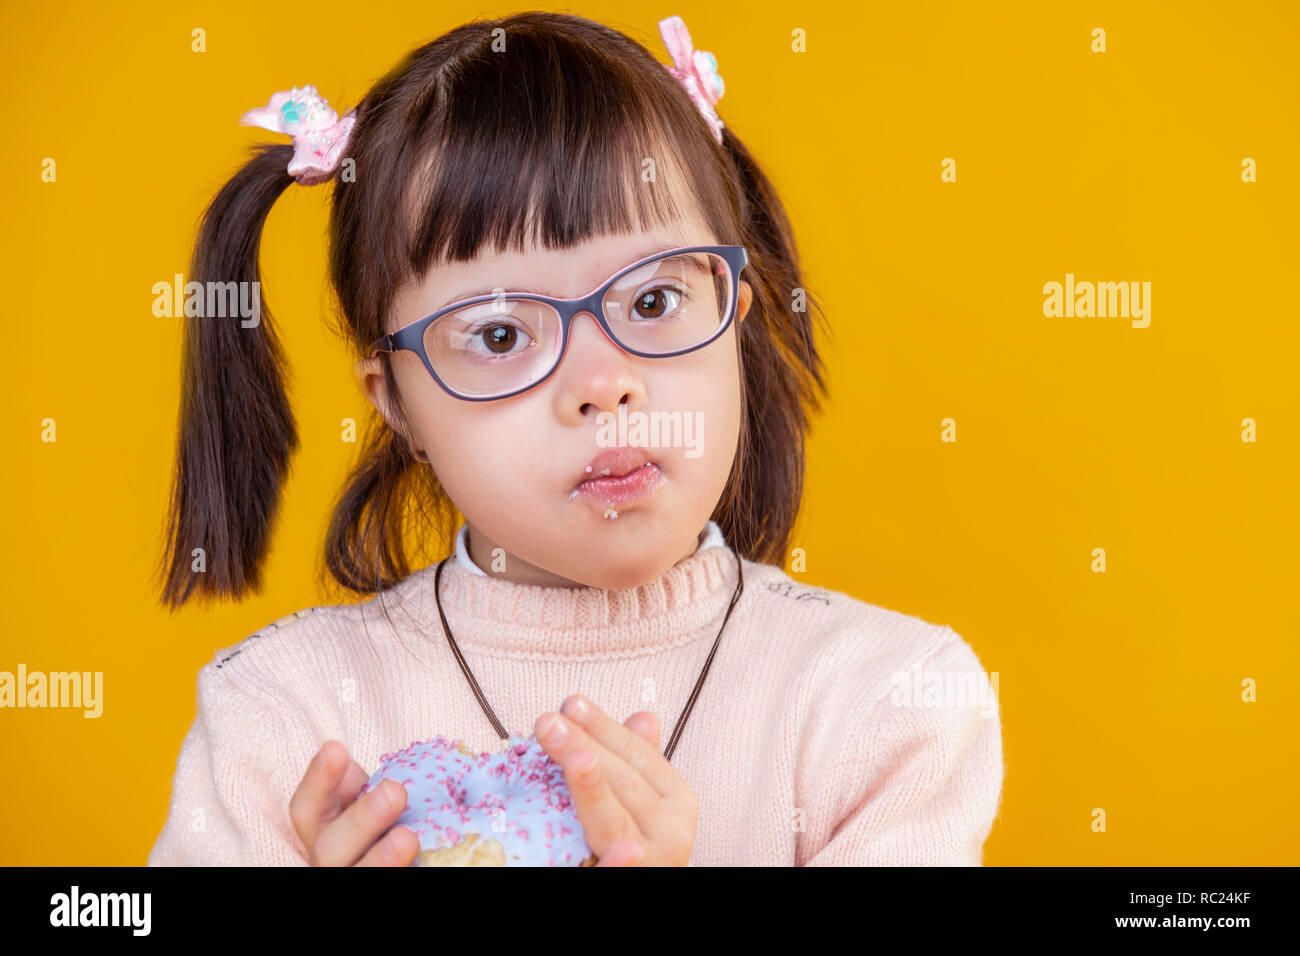 Curious pretty child with chromosome abnormality having crumbles Stock Photo